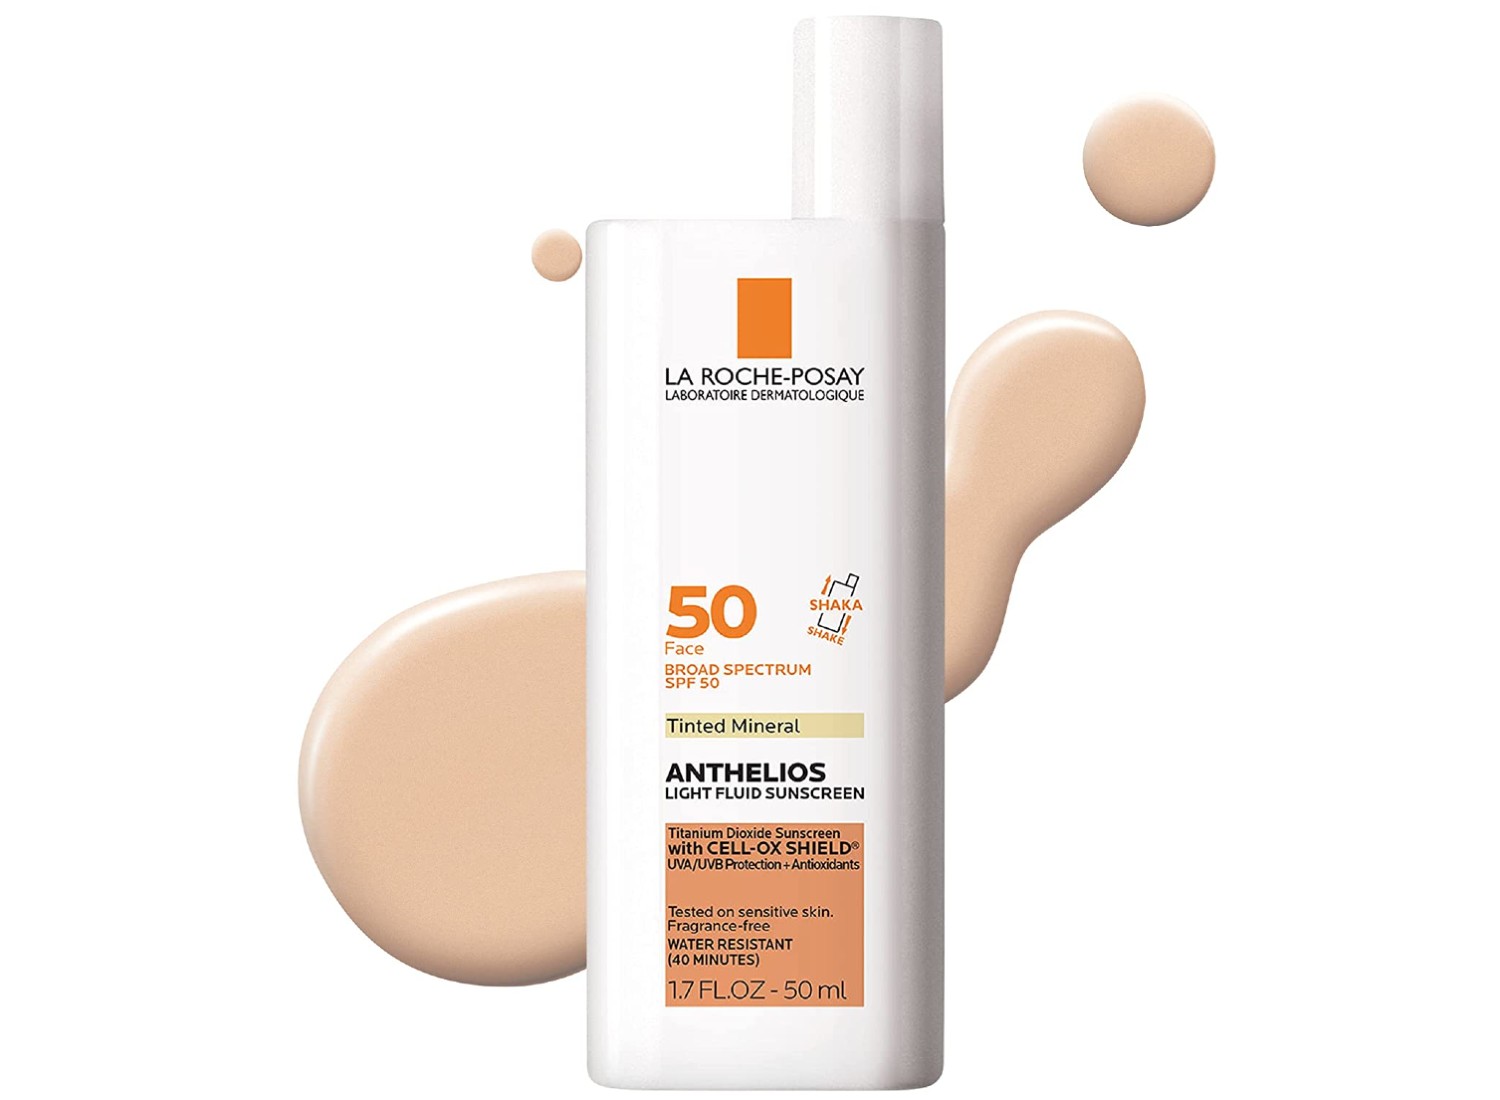 La Roche-Posay Anthelios Tinted Sunscreen